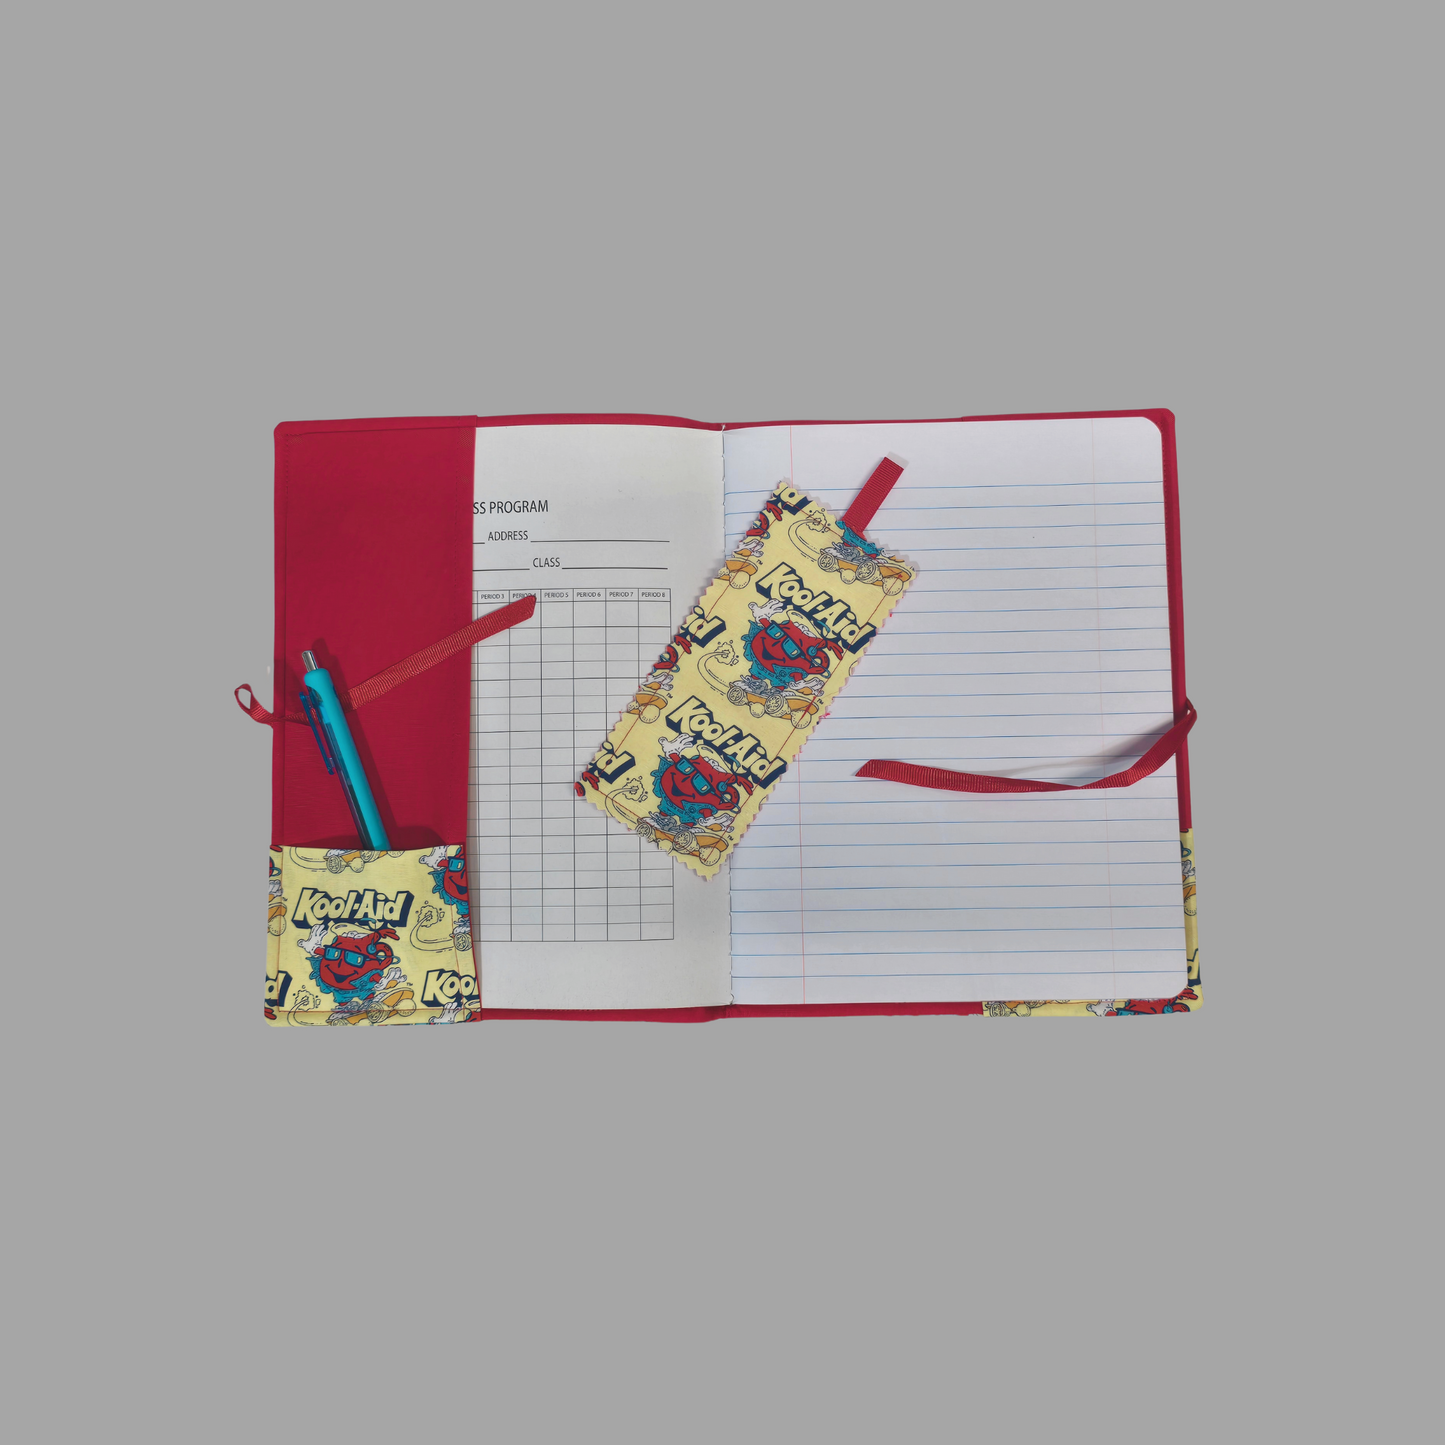 Kool-Aid Notebook Composition Book Cover Nostolgic Kool-Aid Man School Office Journal Diary